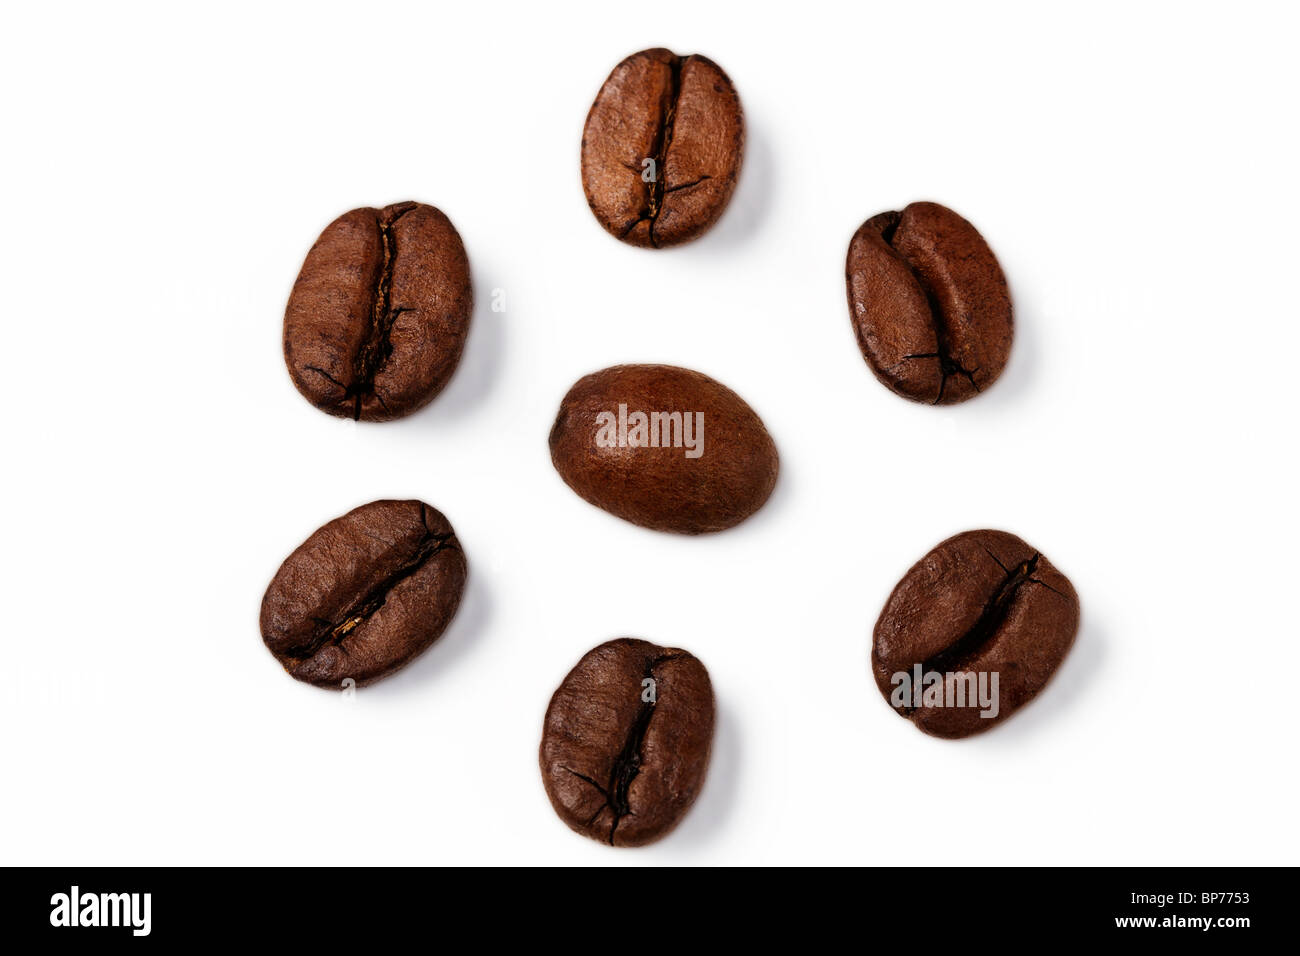 closeup of one coffee bean surrounded by other coffee beans Stock Photo